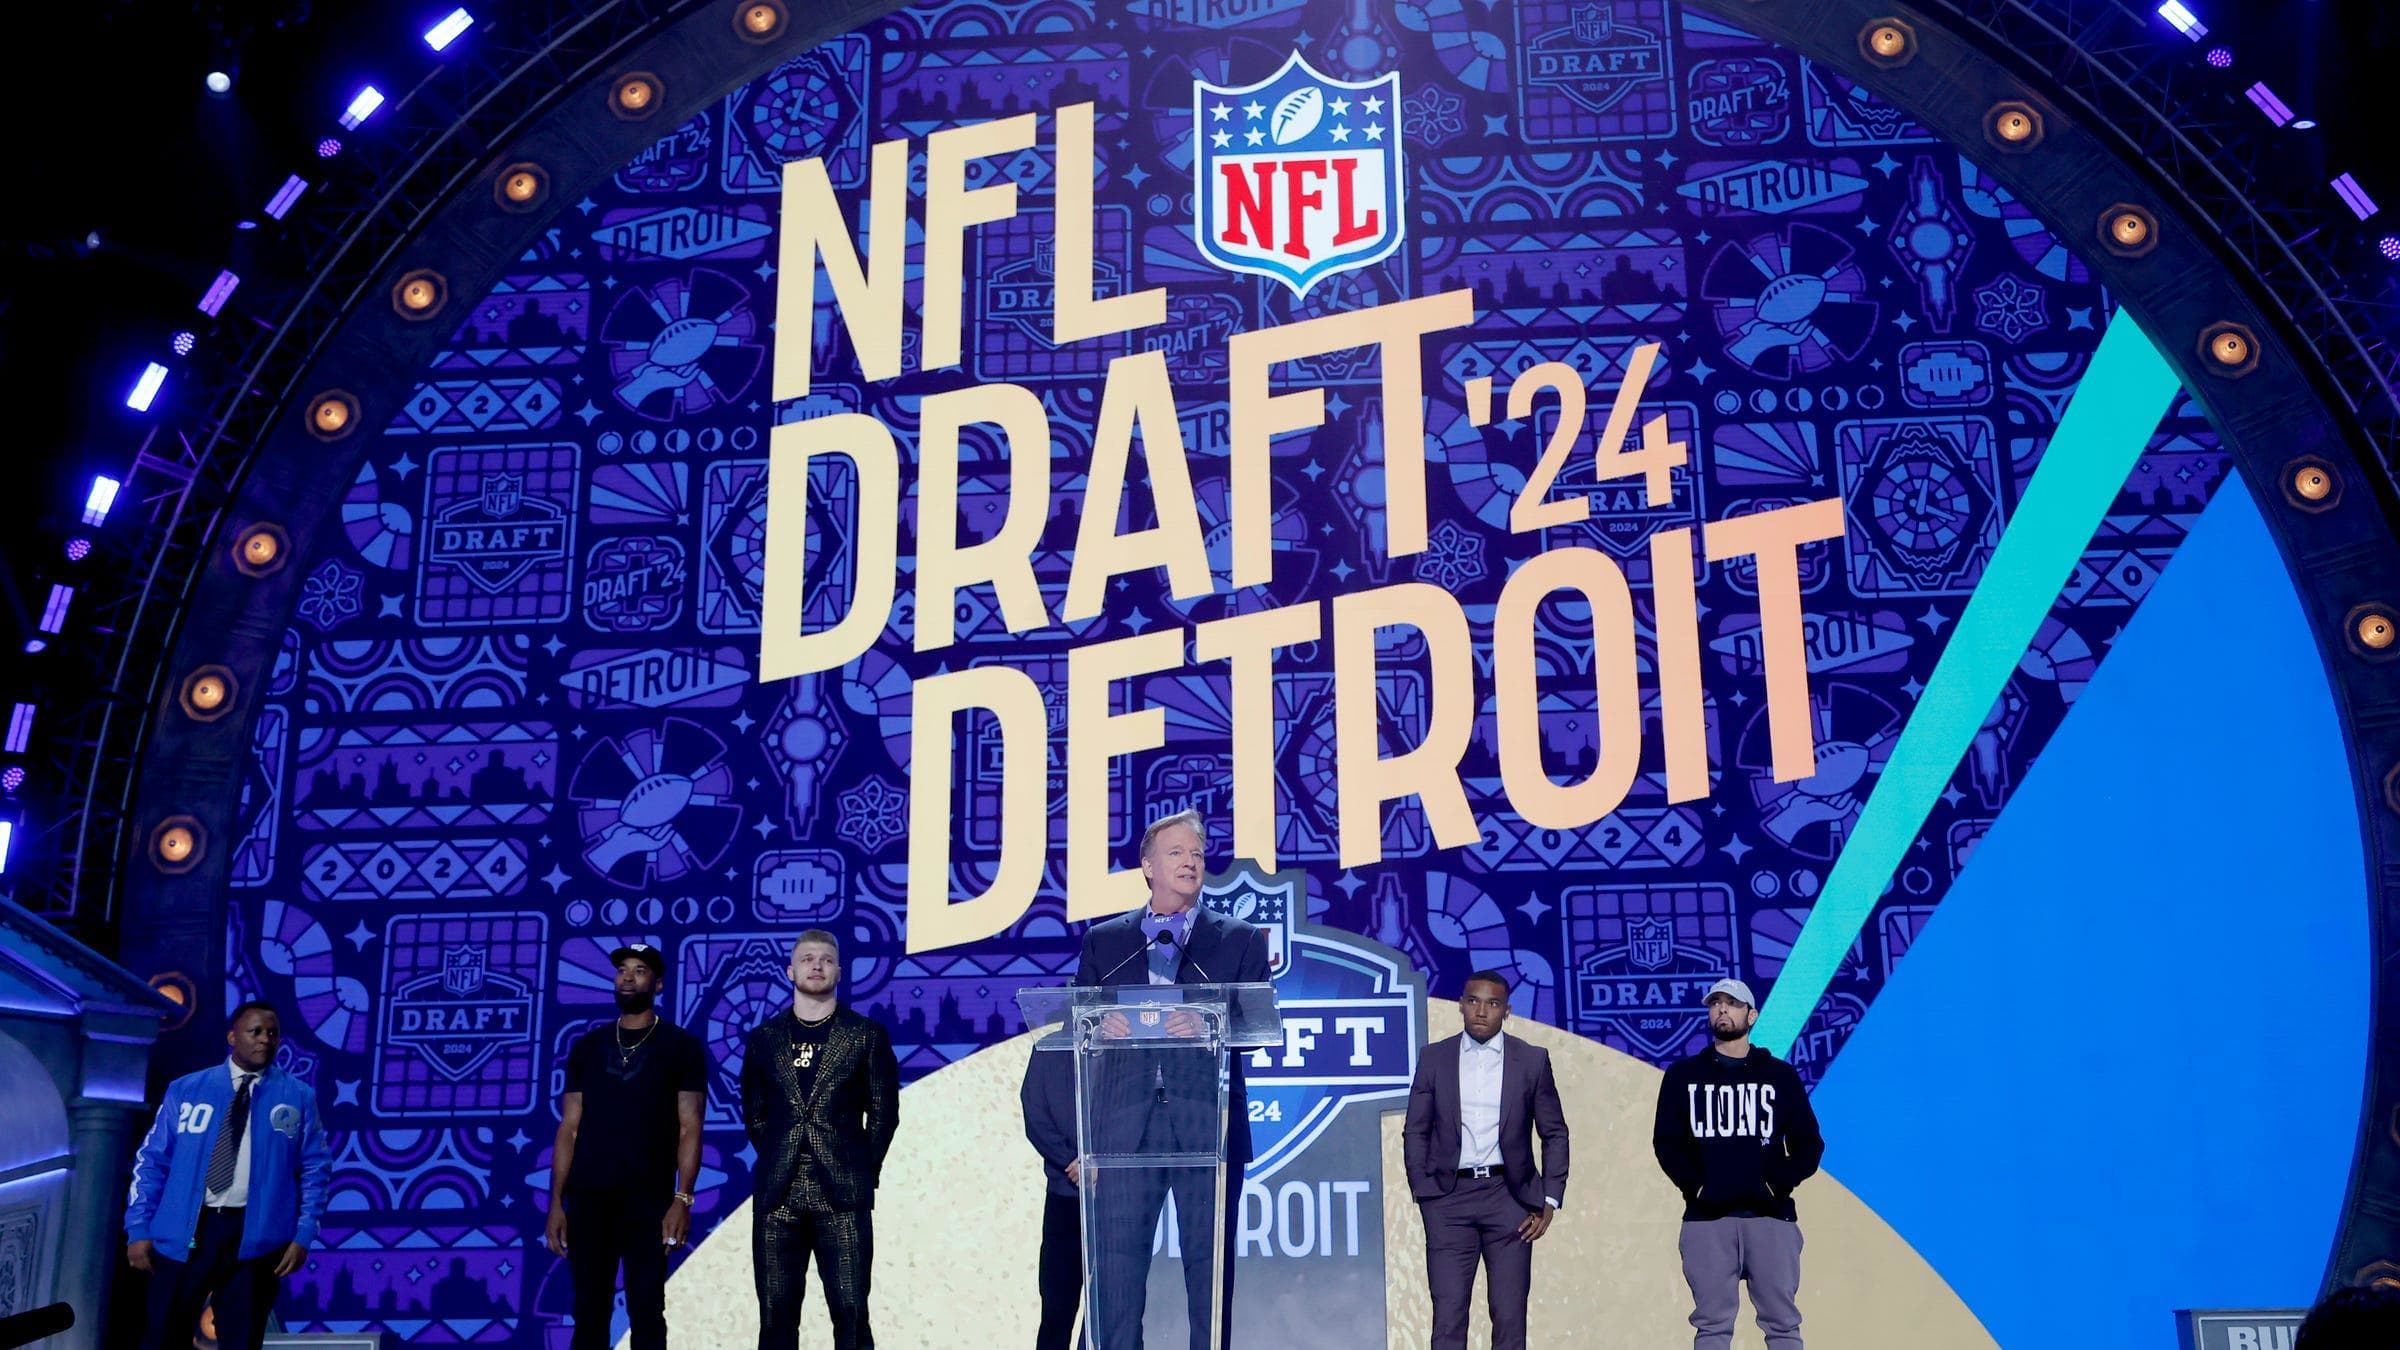 Unofficial 2025 NFL Draft compensatory picks released by Over the Cap